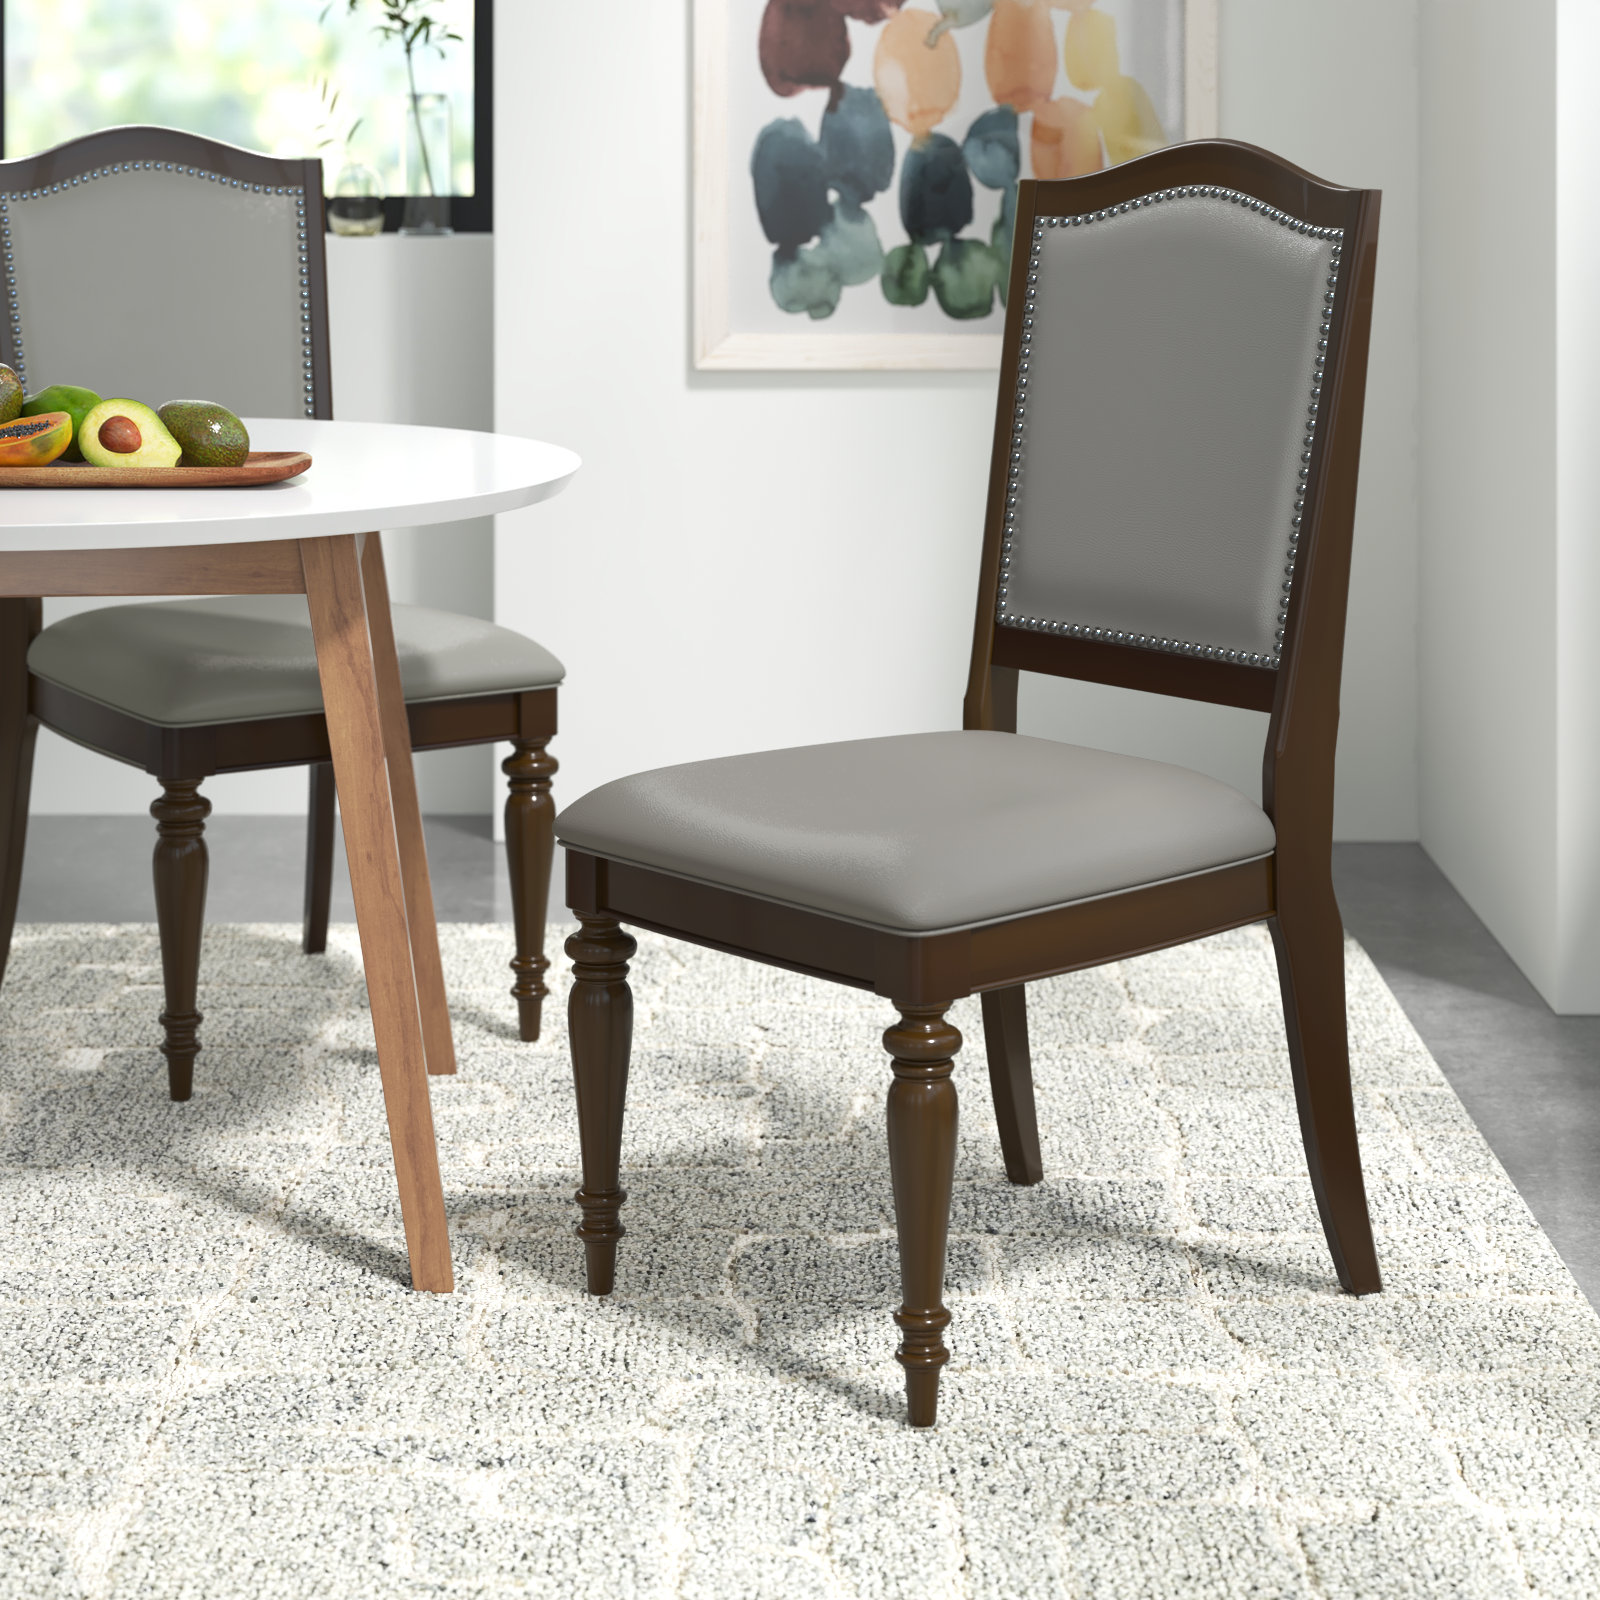 New Spec Faux Leather Dining Side Chair in White (Set of 2)